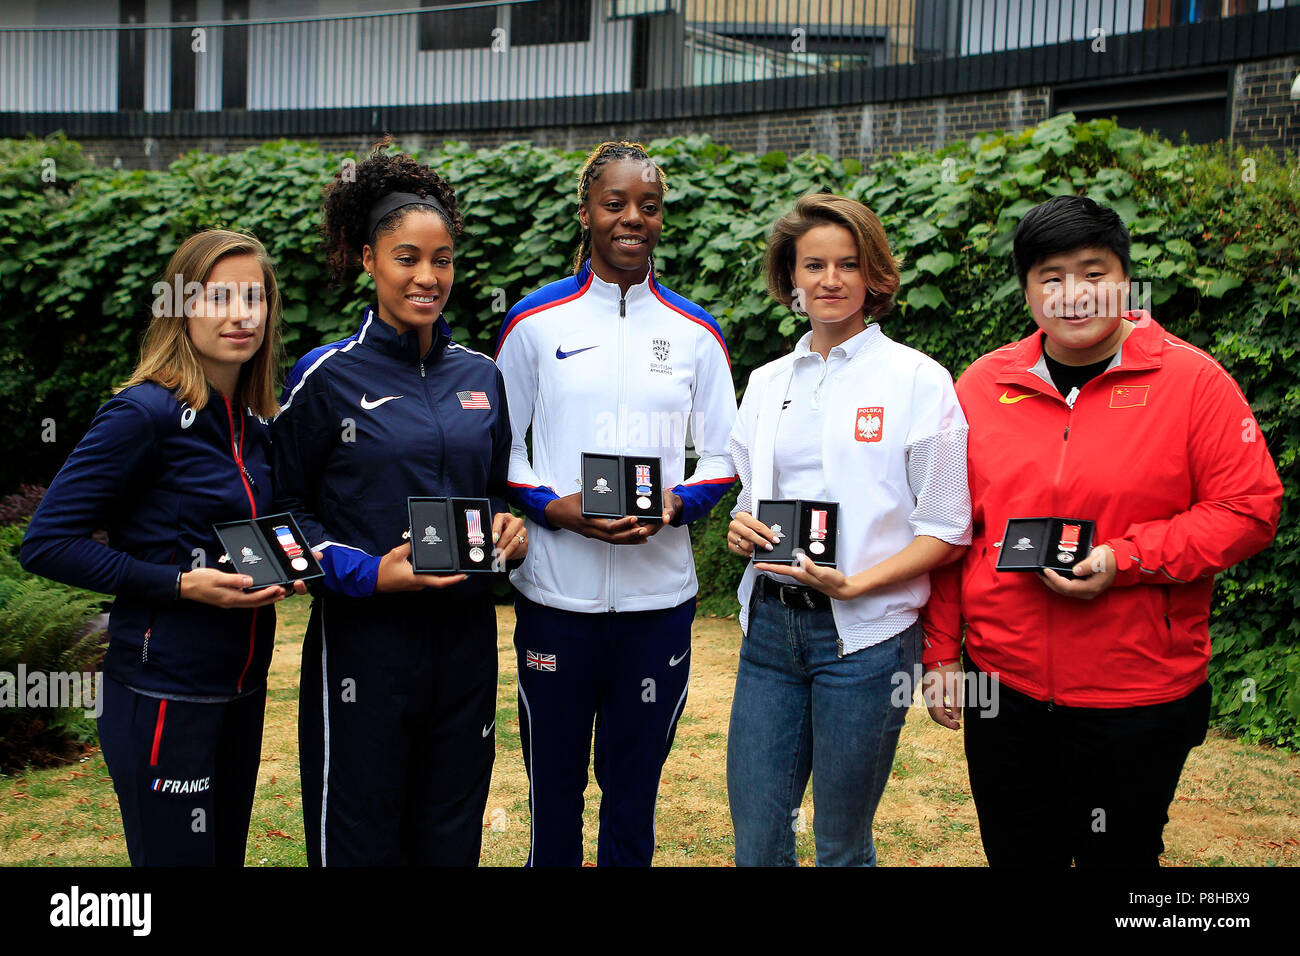 London, UK. 11th July, 2018. Lorraine Ugen of Great Britain ©, Queen Harrison of the USA (2L), Ninon Guillon-Romarin of France (1L), Anna Jagaciak-Michalska of Poland (1R) and Gong Lijiao of China (2R) pose with their medals.  all the athletics world cup team captains, all Women, today are presented with unique Platinum captain's medals marking 100 years since first British women secured the right to vote. Athletics World Cup media day at the Terrace Gallery, Museum of London in London on Thursday 12th July 2018. Credit: Andrew Orchard sports photography/Alamy Live News Stock Photo